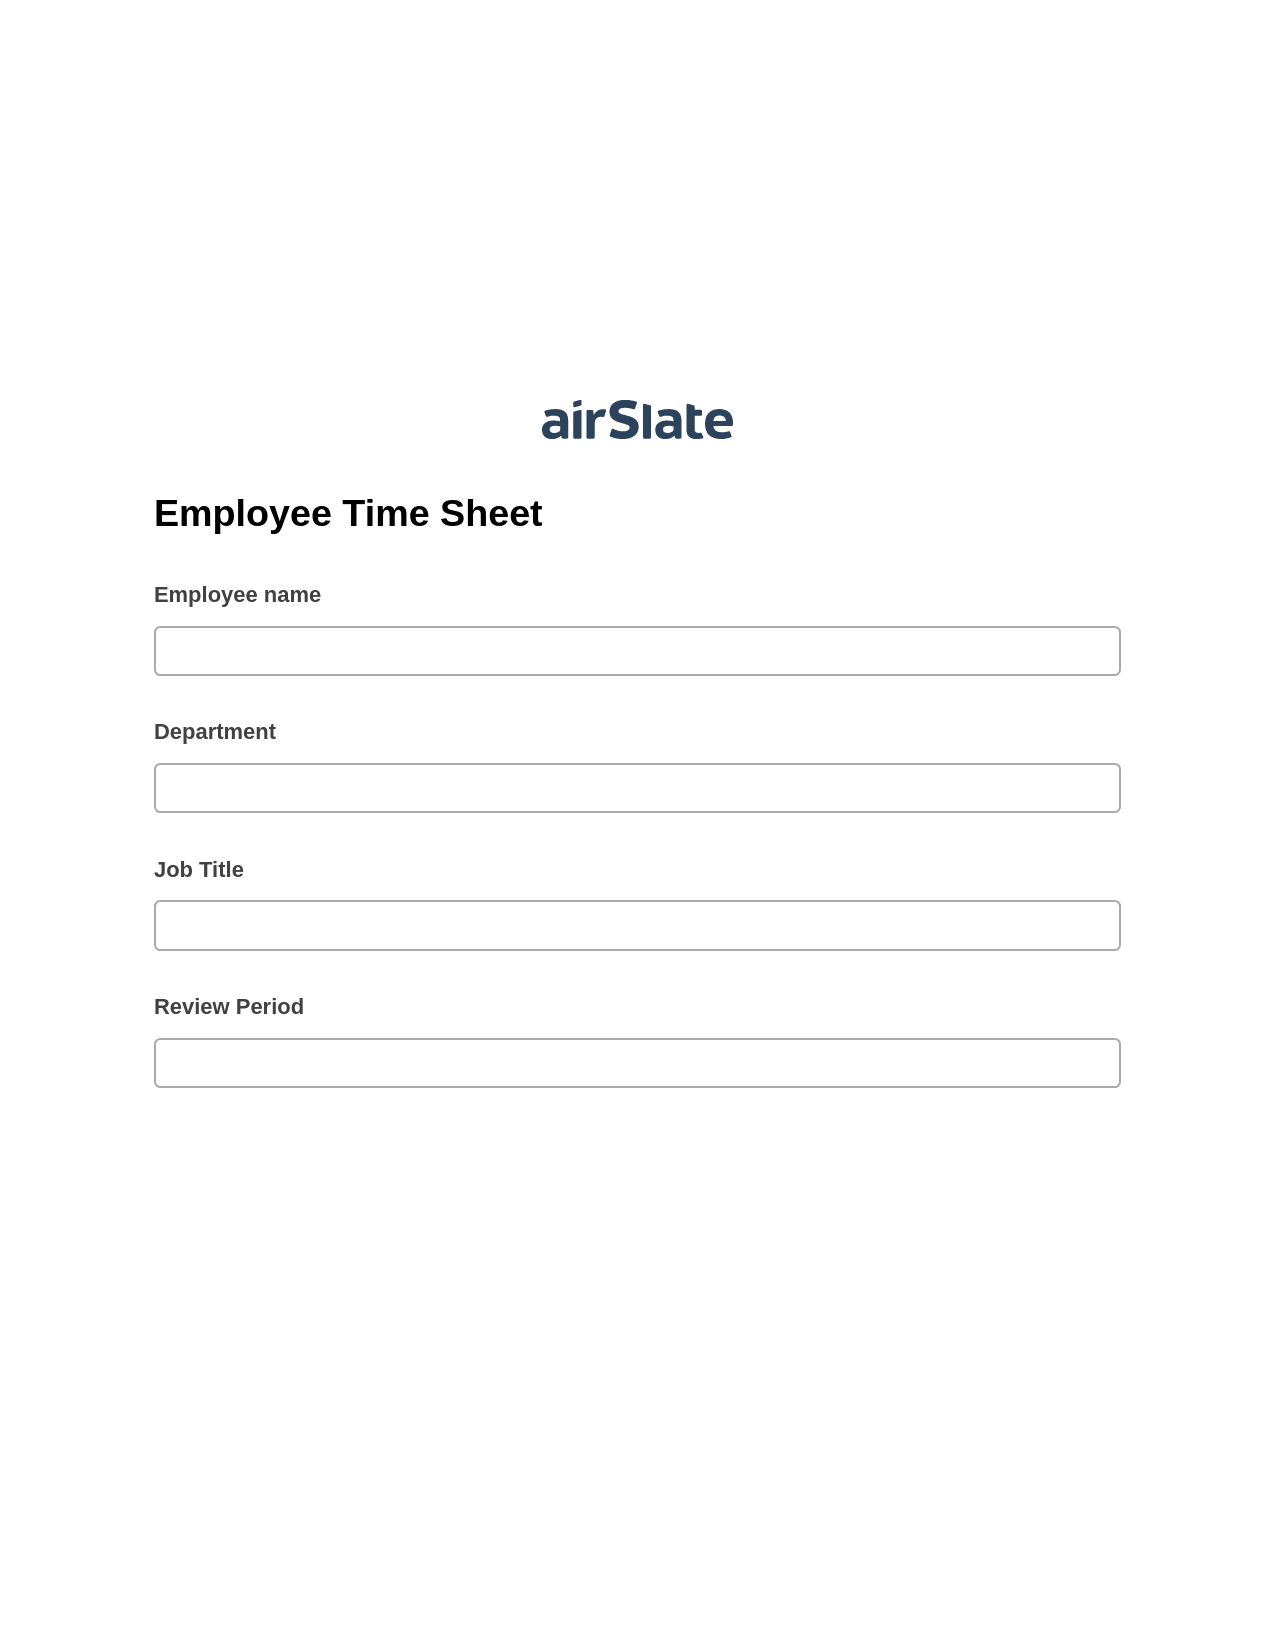 Employee Time Sheet Pre-fill from Excel Spreadsheet Bot, Add Tags to Slate Bot, Export to NetSuite Bot